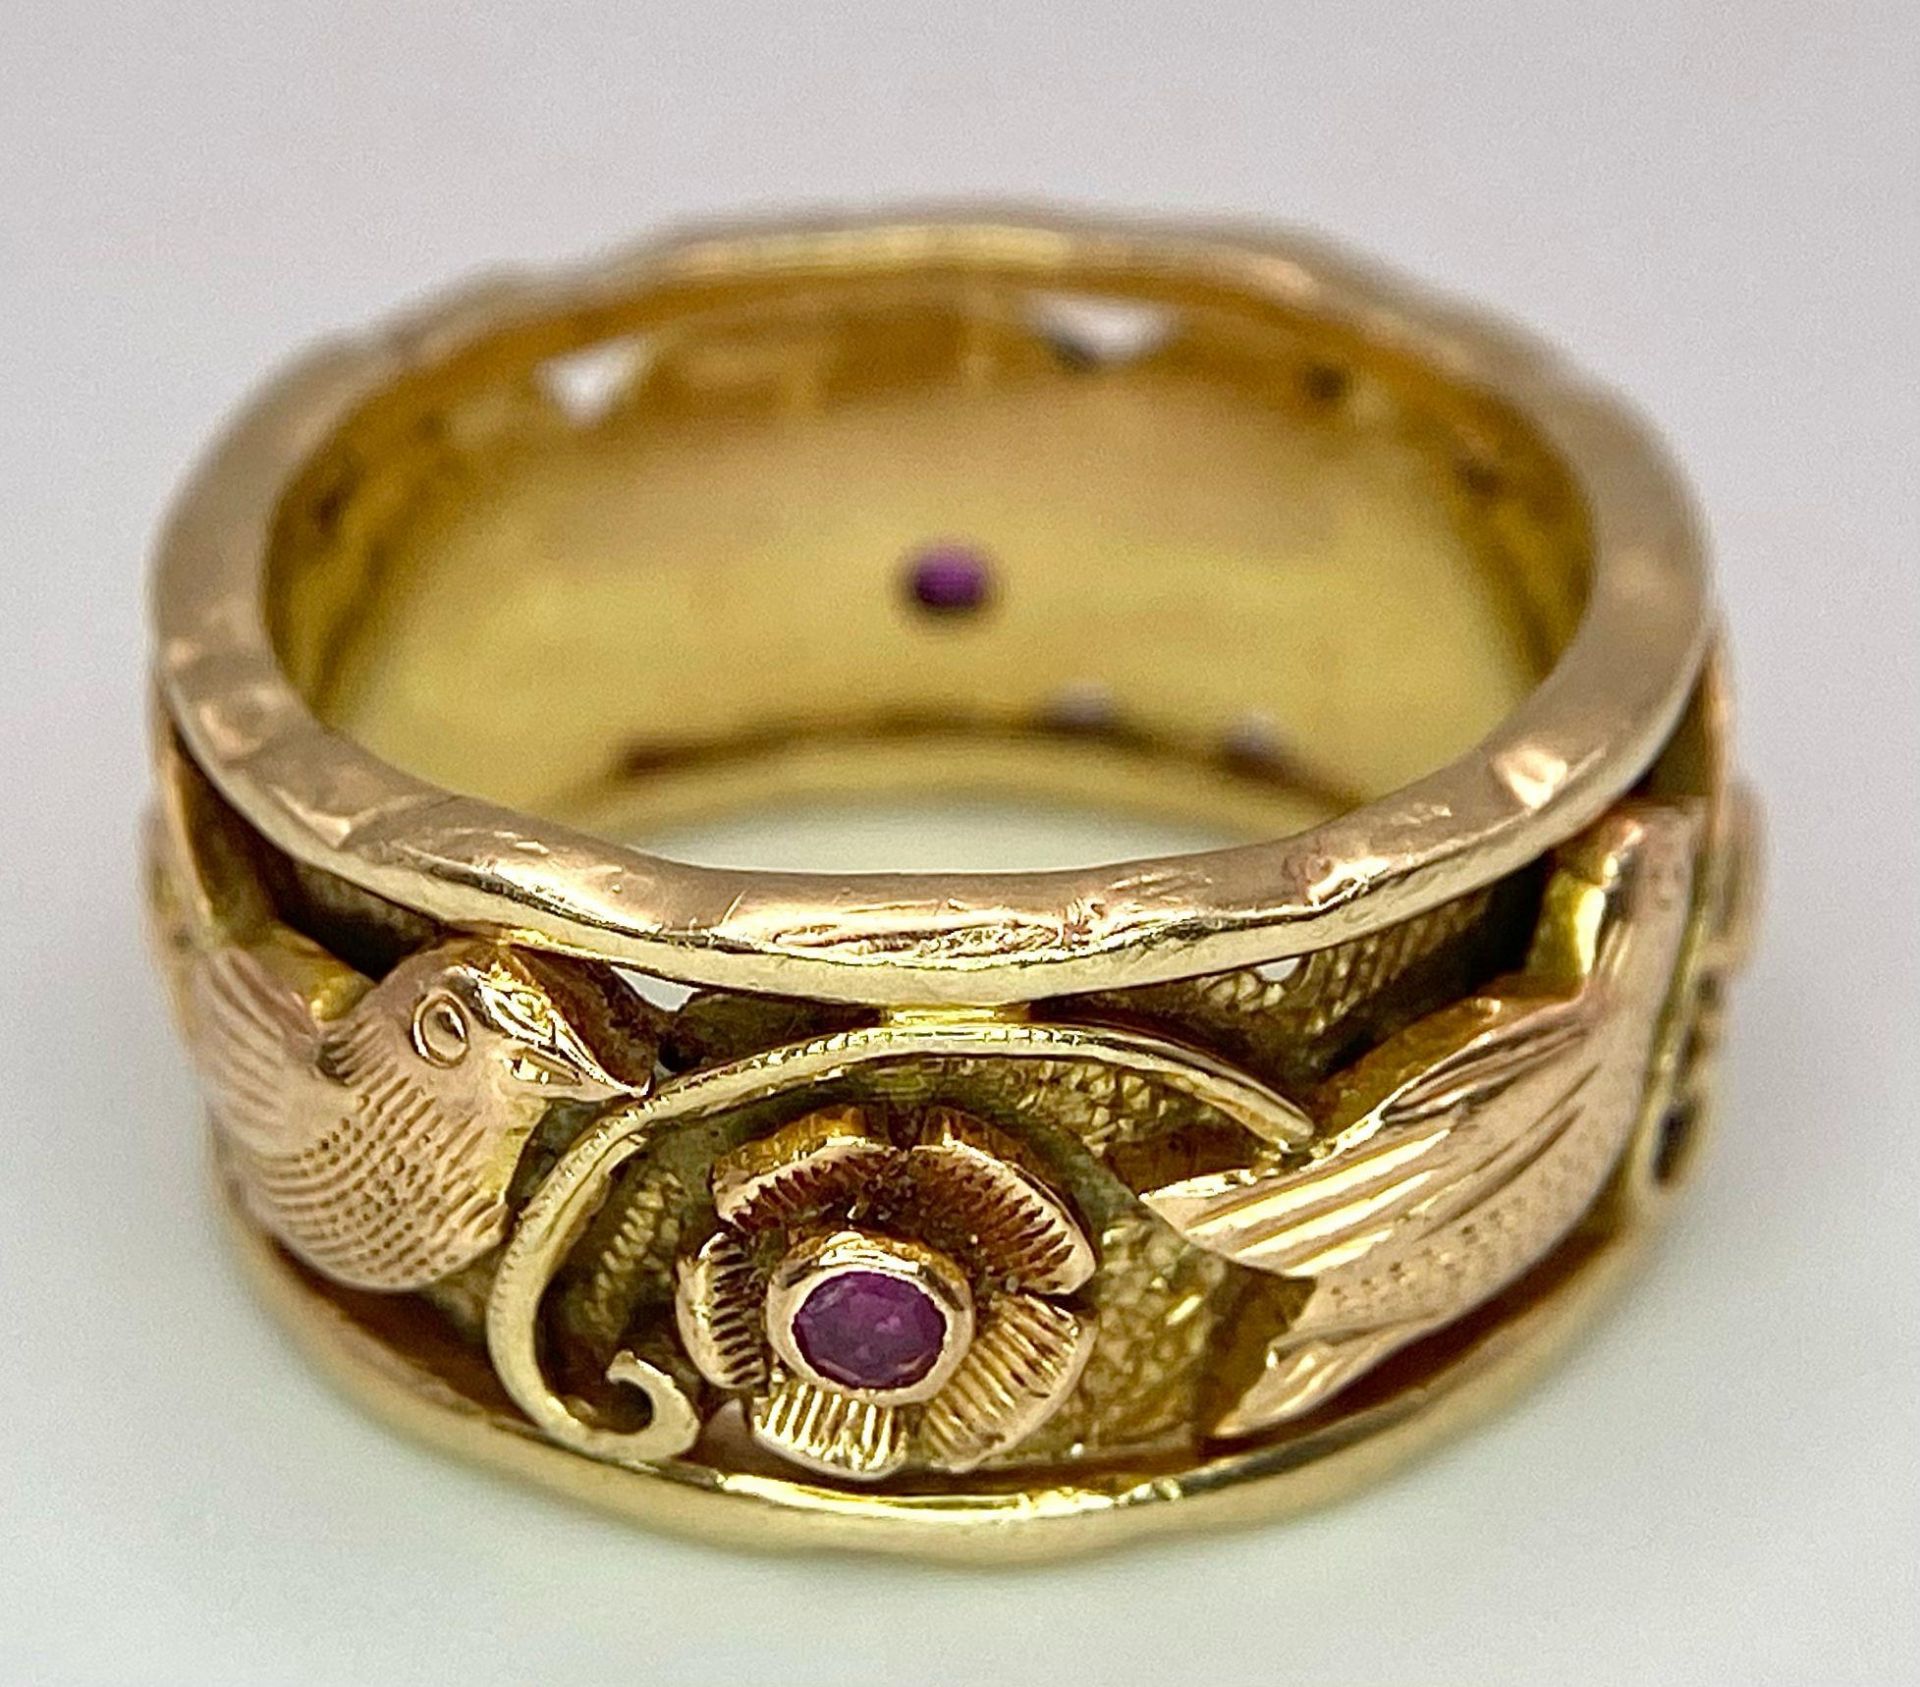 A Beautifully Decorated Bird and Floral 14K Rose Gold and Ruby Band Ring. Size N. 7.5g total weight. - Image 4 of 6